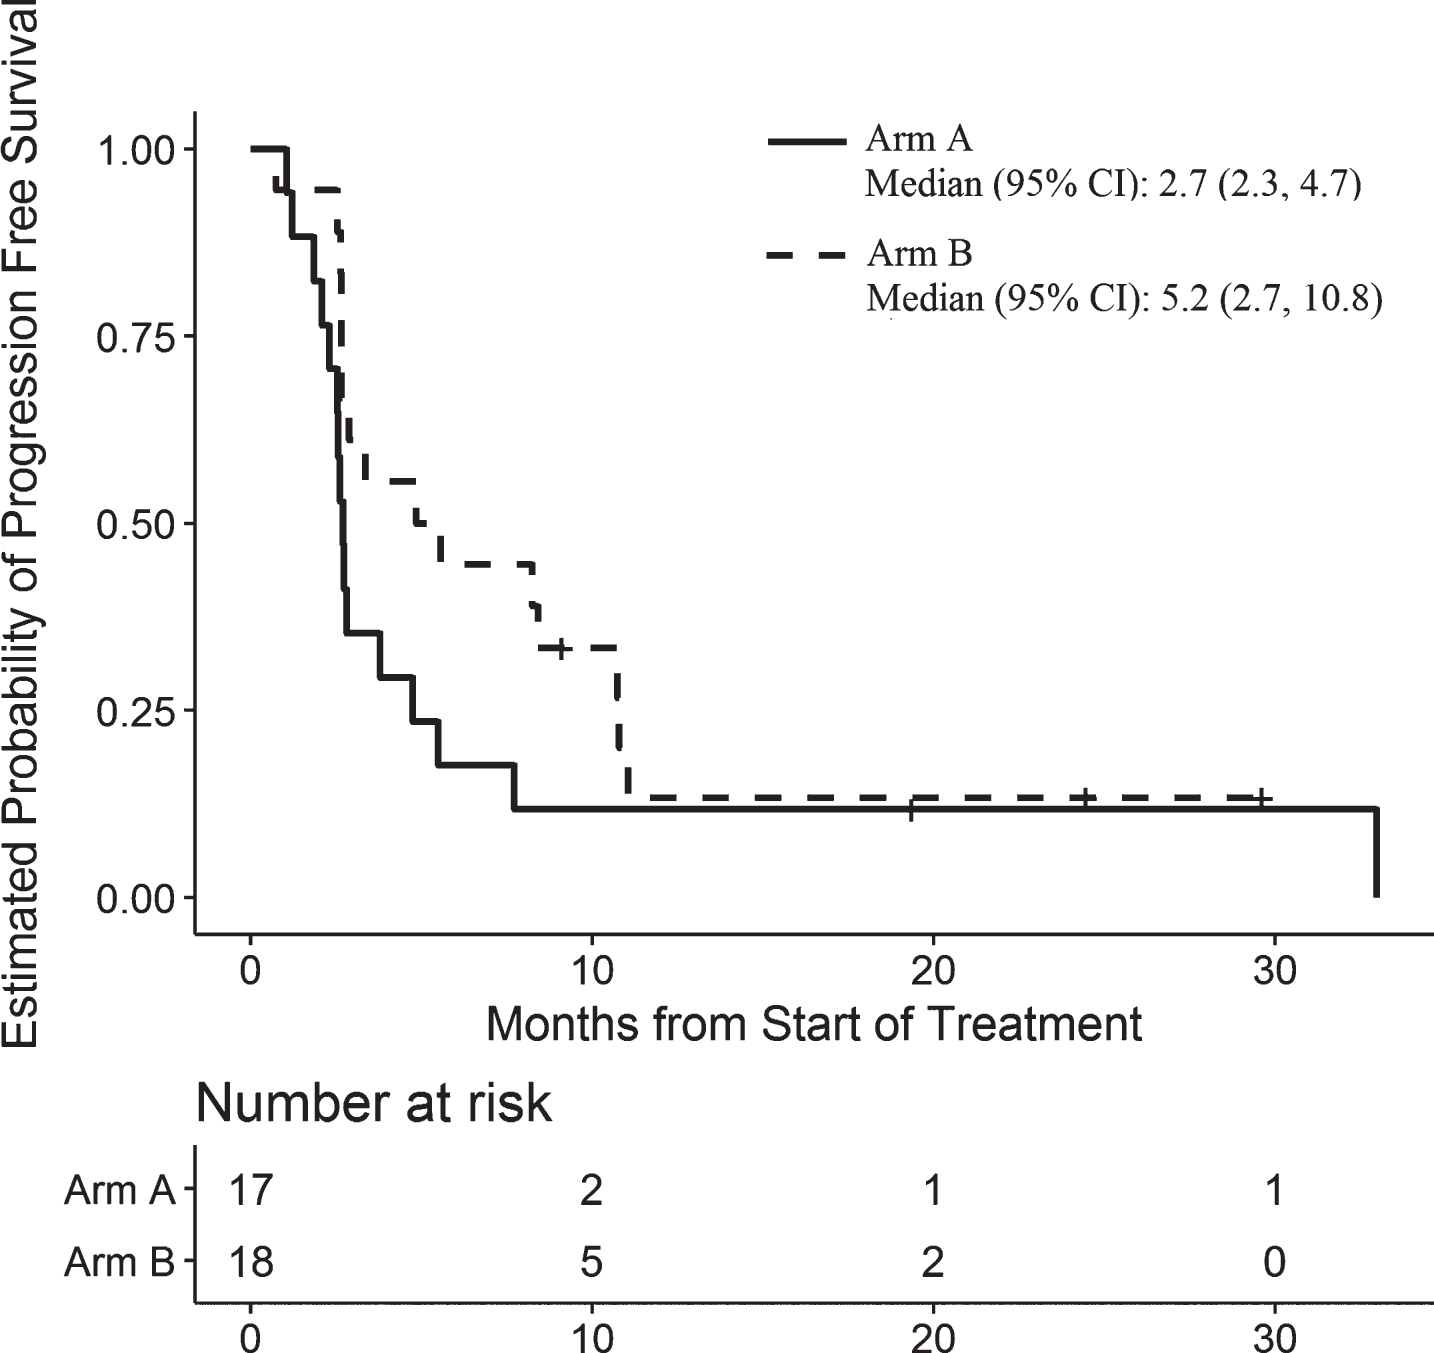 Progression-Free Survival for Patients in Arm A and Arm B.